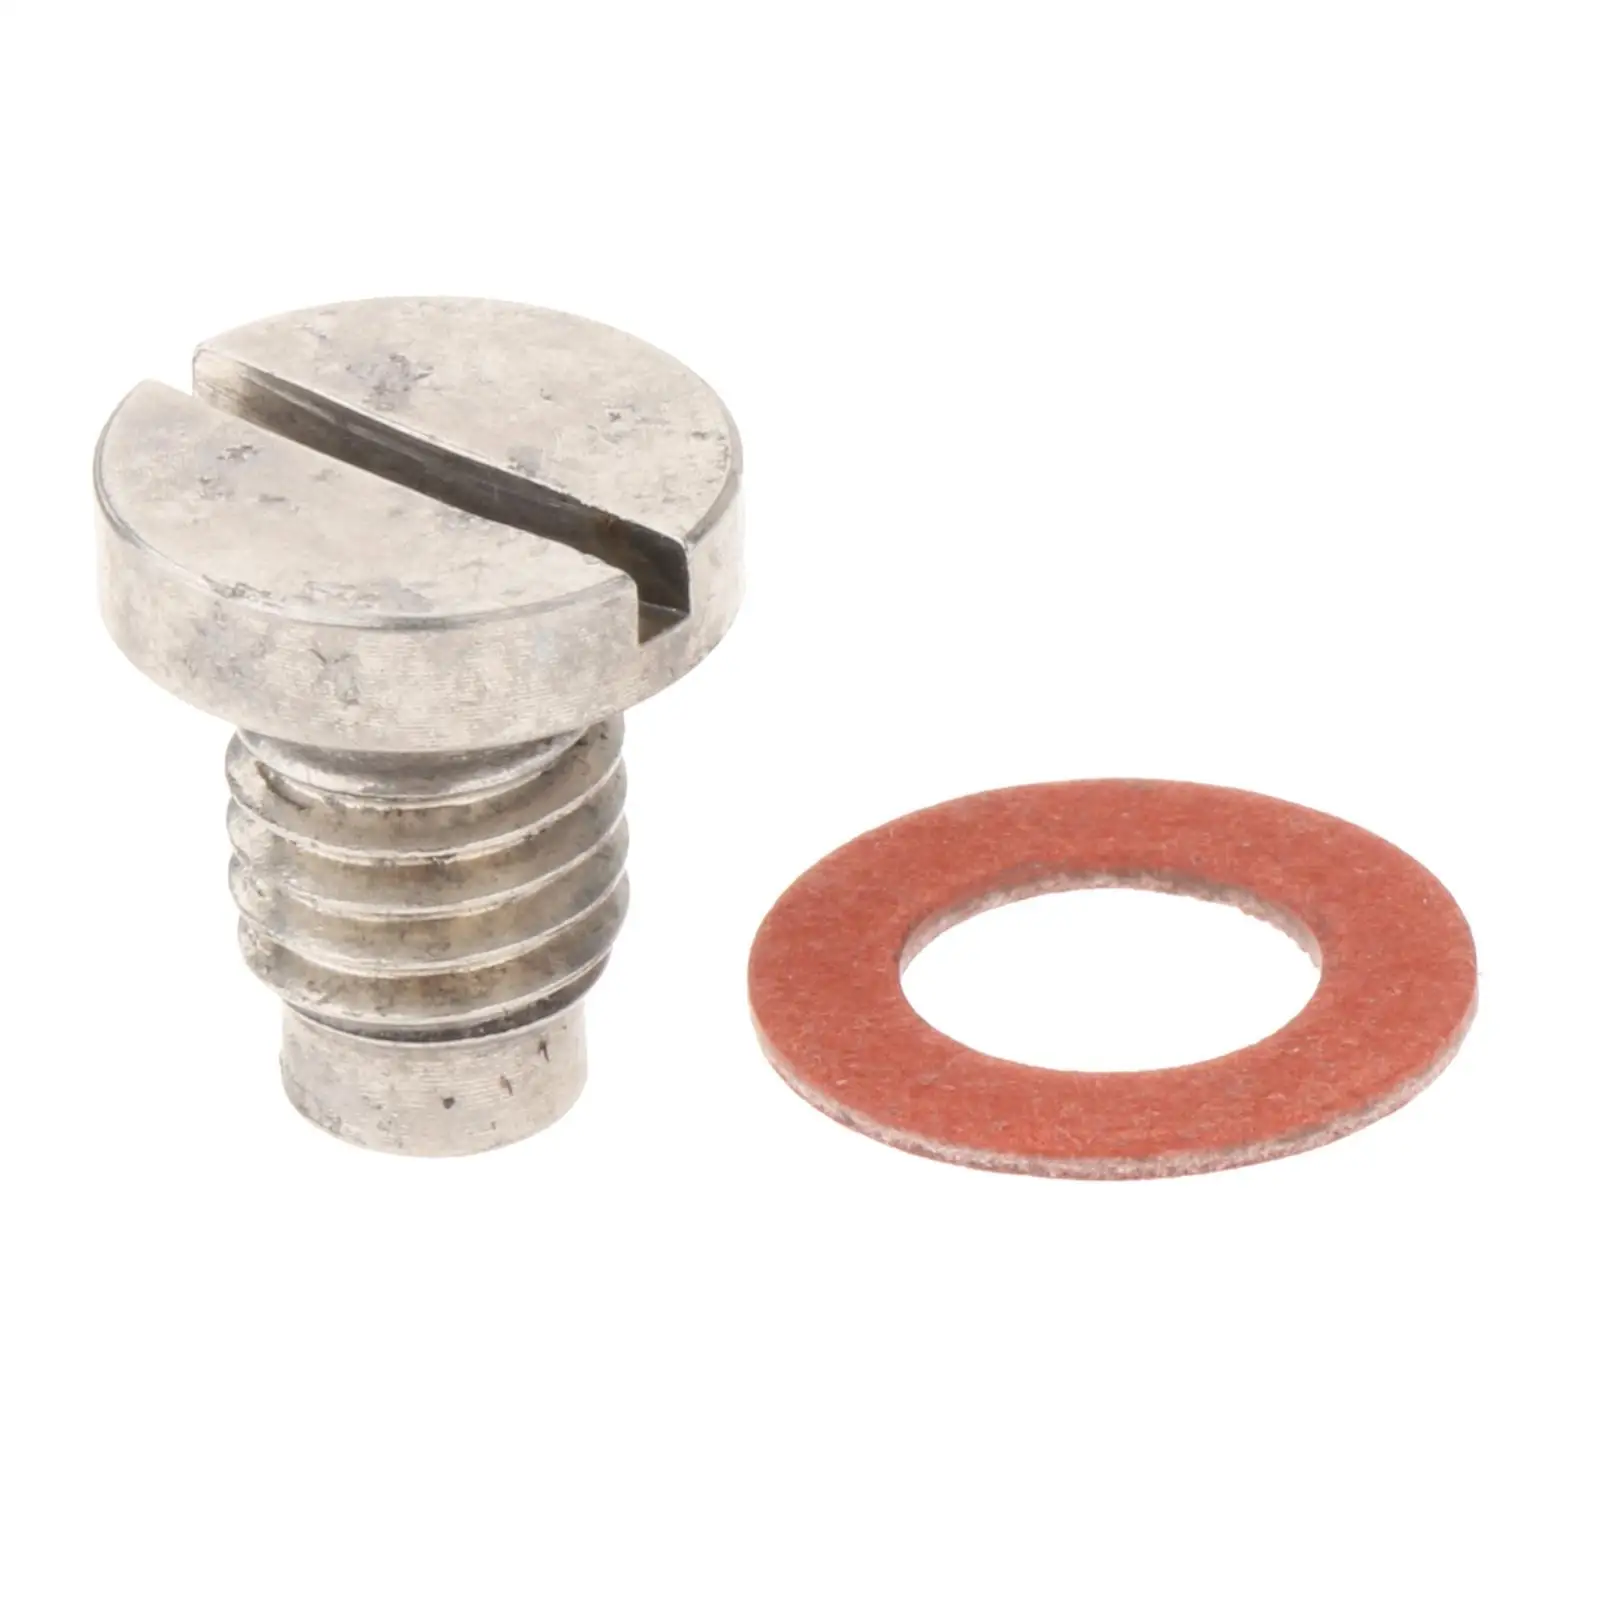 Stainless Steel Plug Screw & Gasket Fit for Outboard Engine Replace Accessories